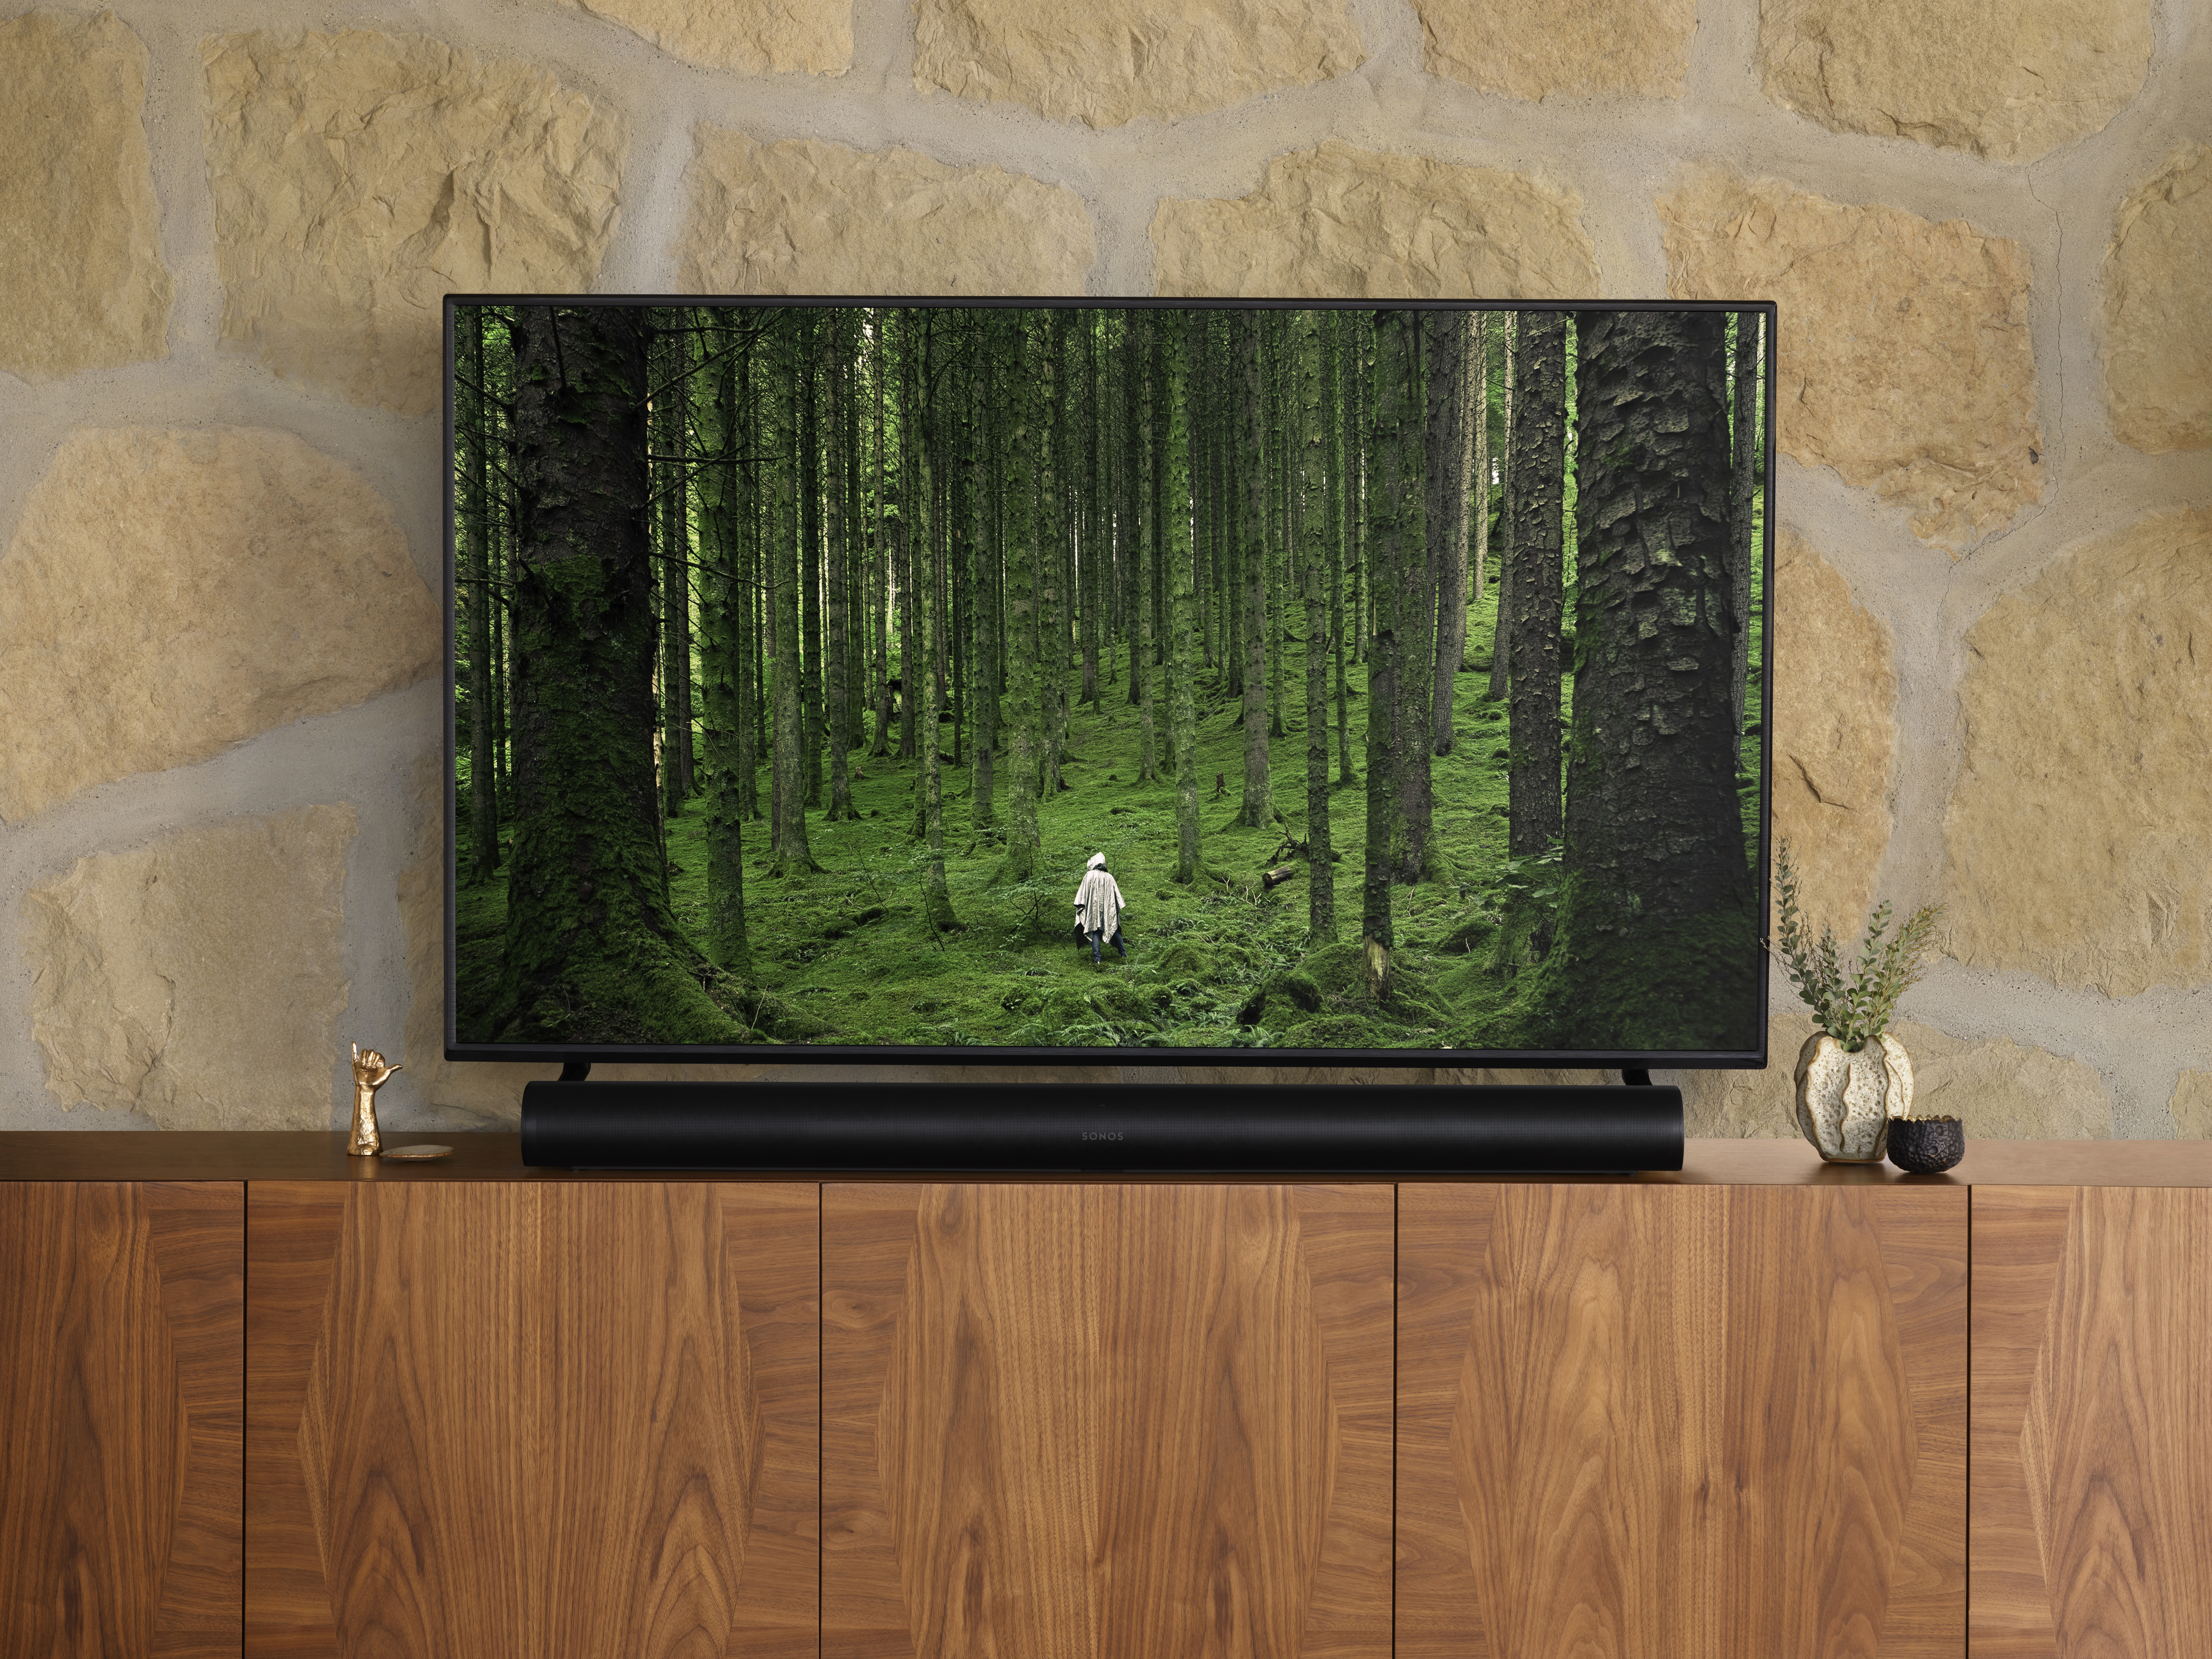 The Sonos Arc soundbar shown with a TV and wooden cabinets 